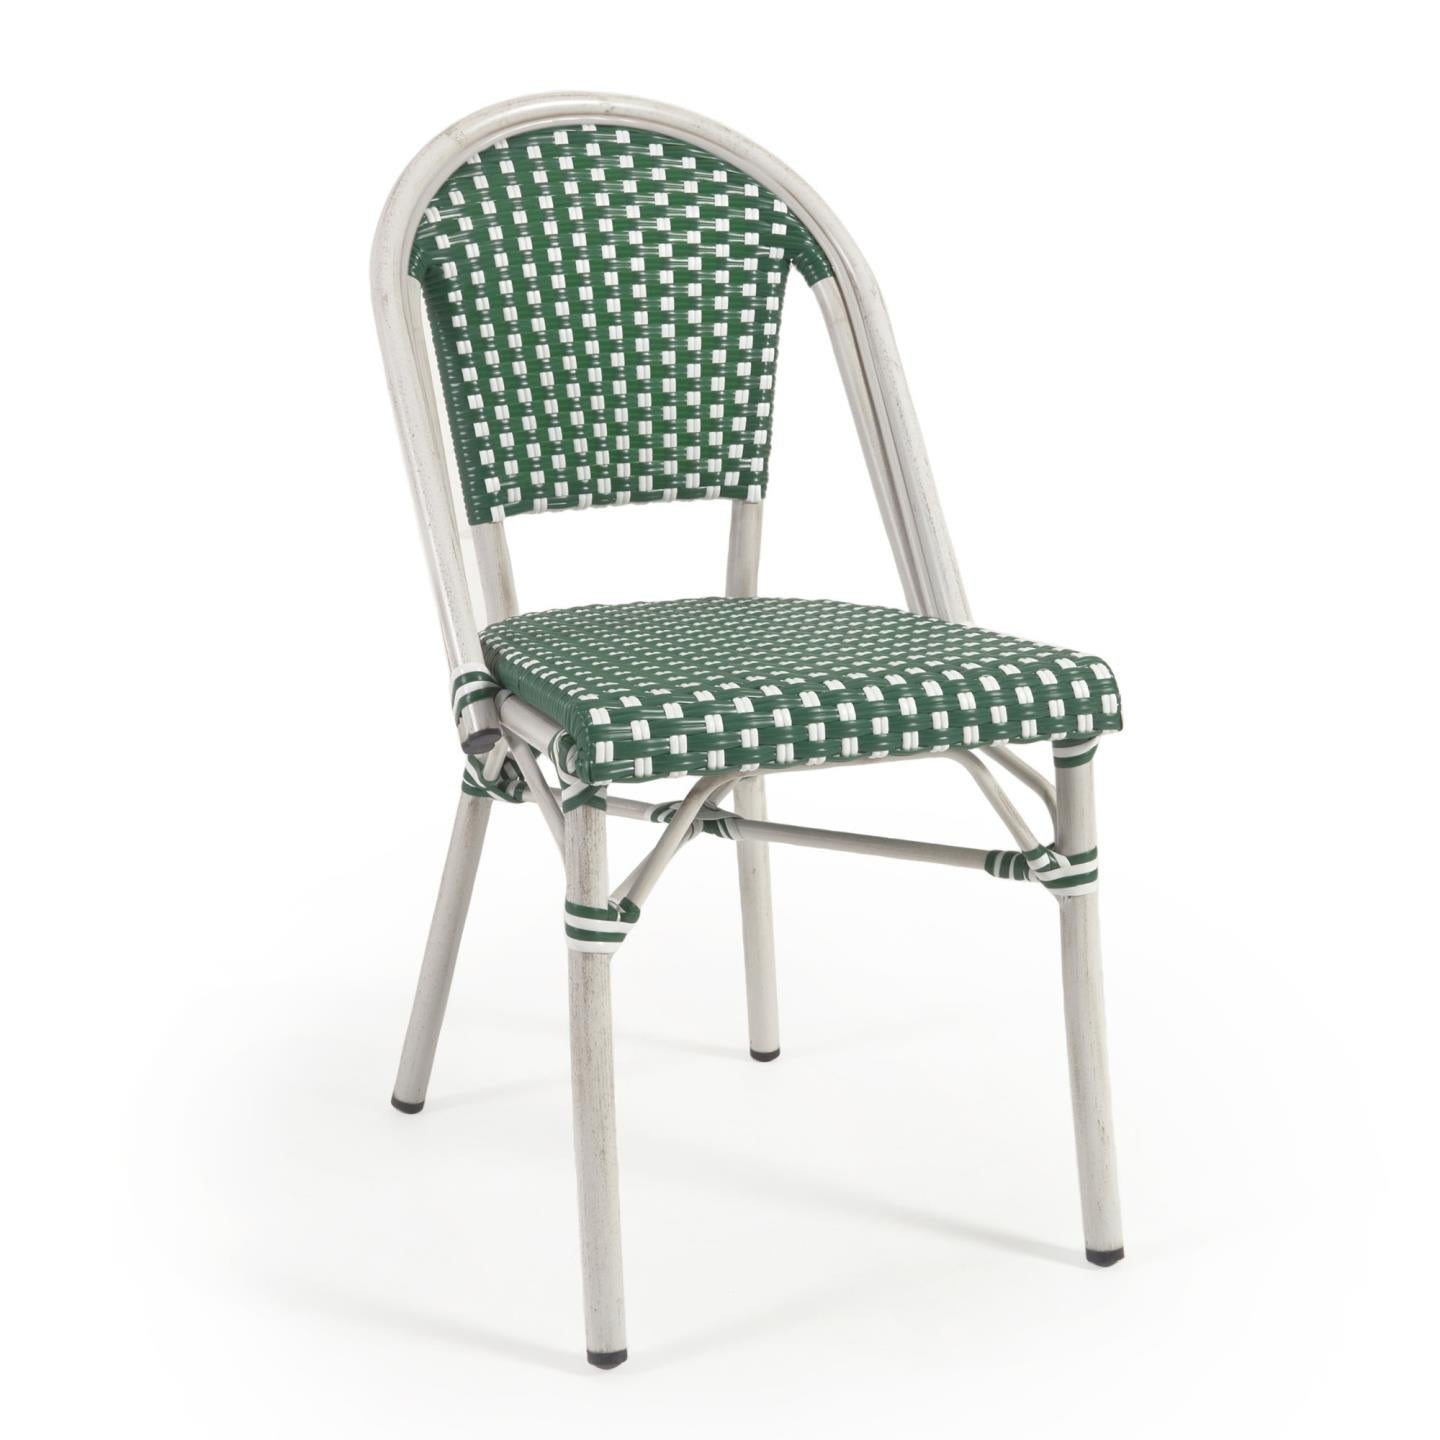 Marilyn stackable outdoor bistro chair in aluminium and synthetic rattan, green & white